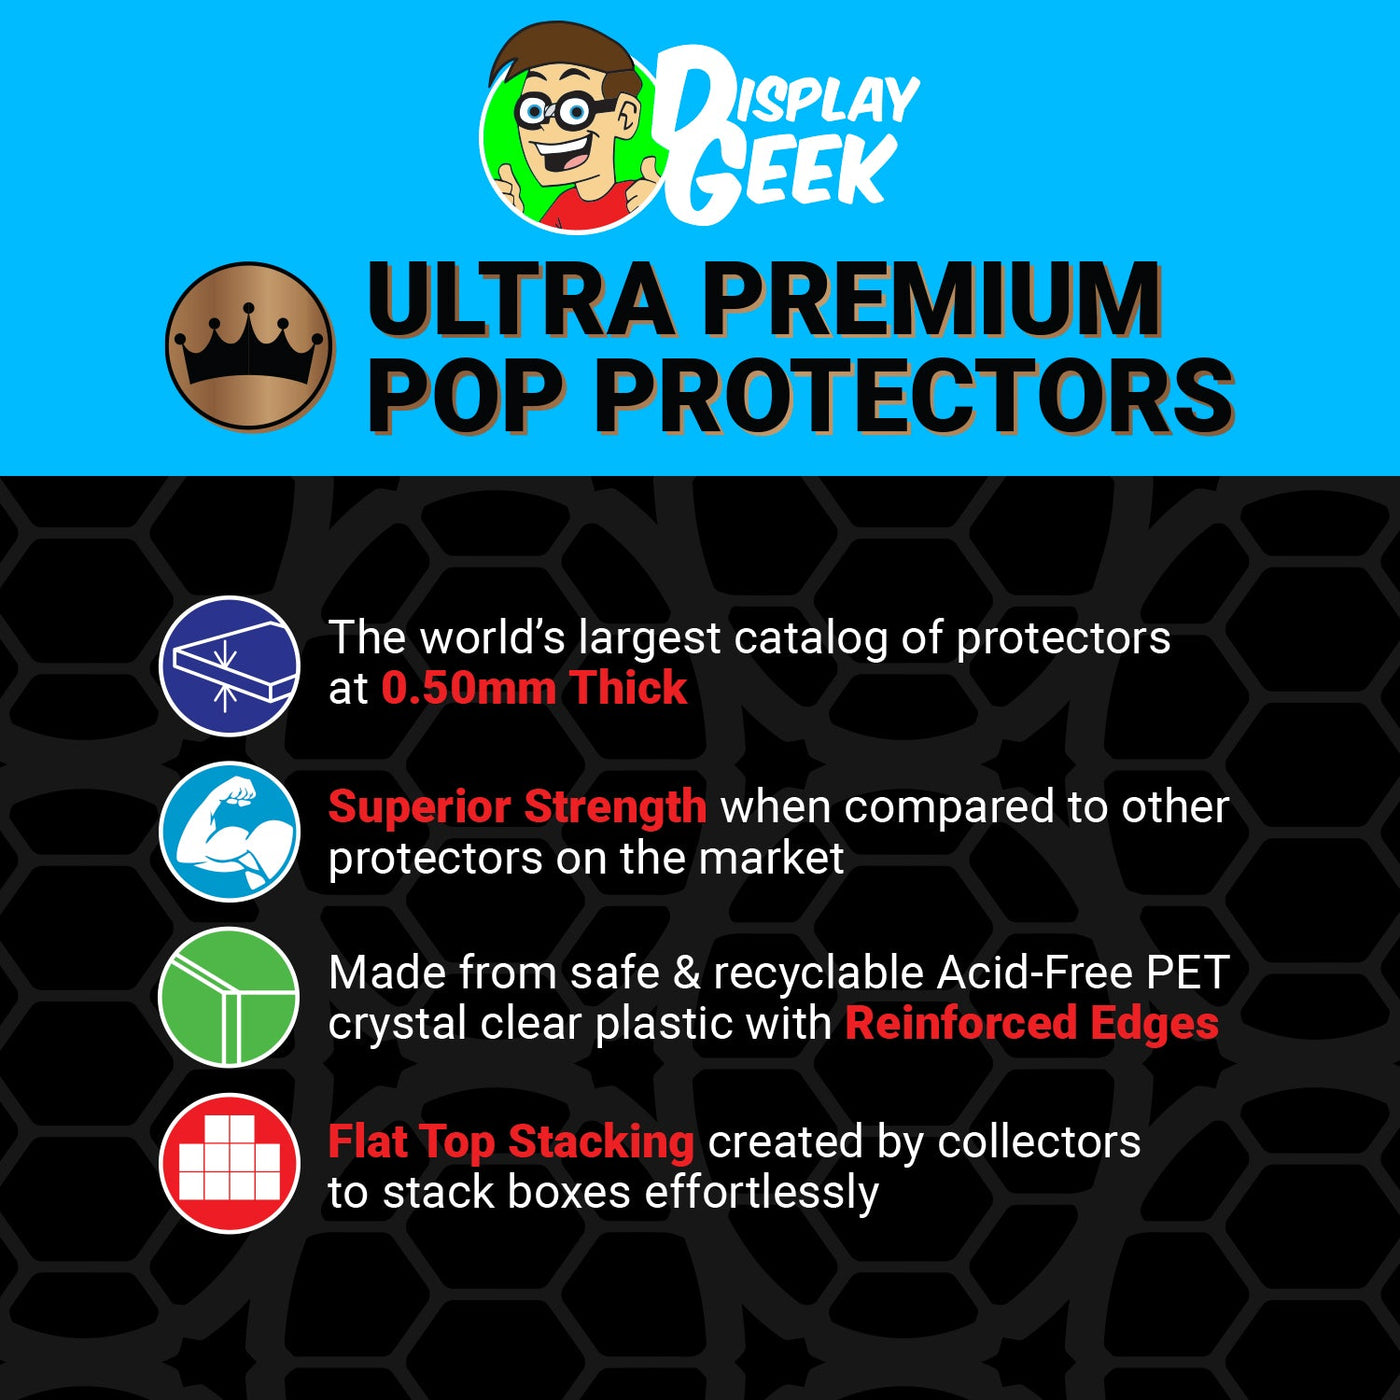 Pop Protector for Freddy Funko Southern California Brown Shirt SDCC on The Protector Guide App by Display Geek